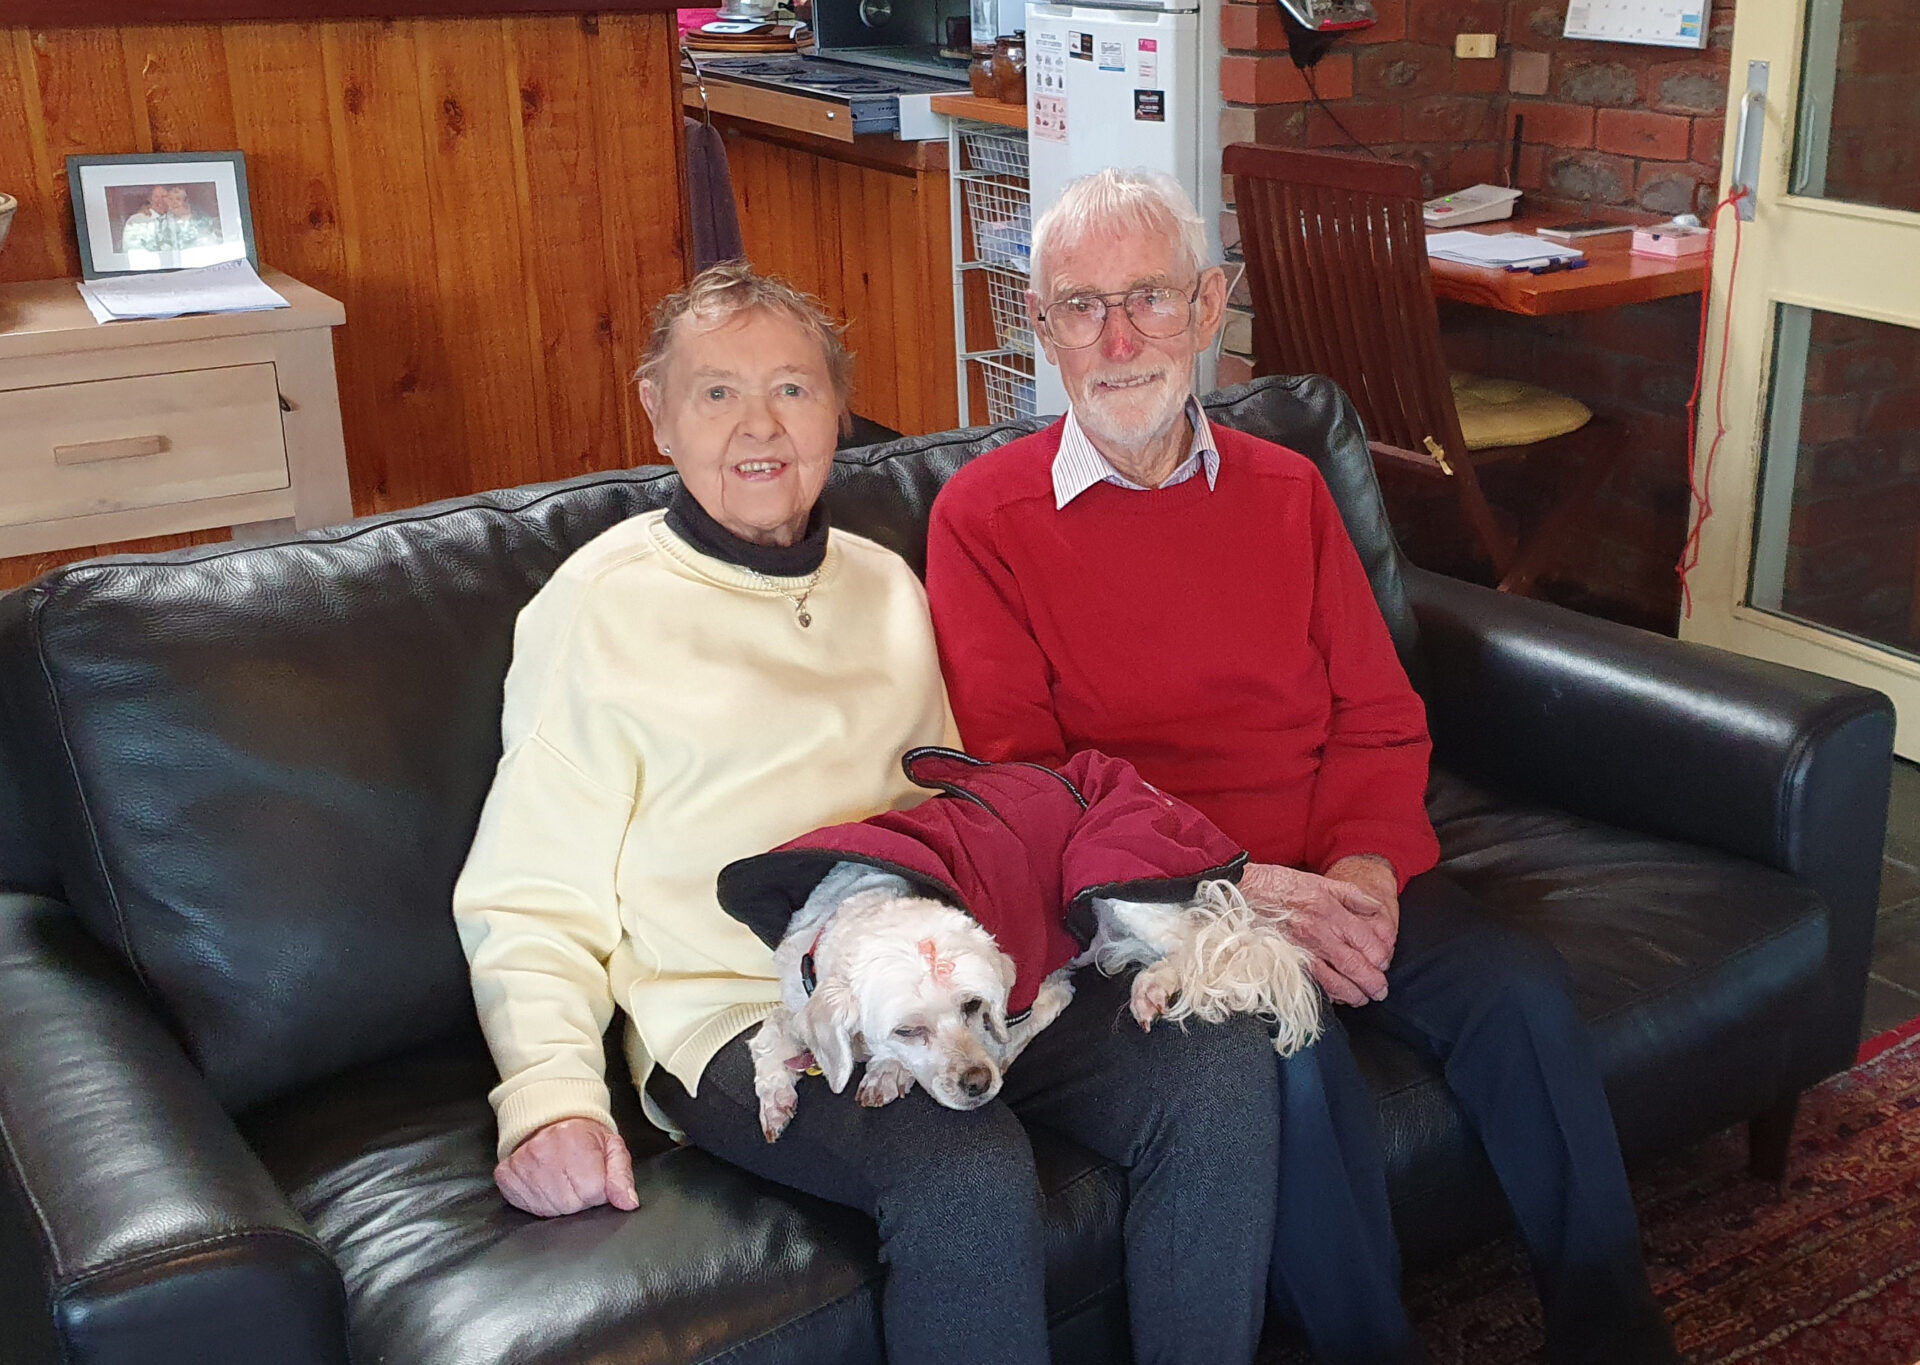 An elderly couple sitting on their couch with their pet dog